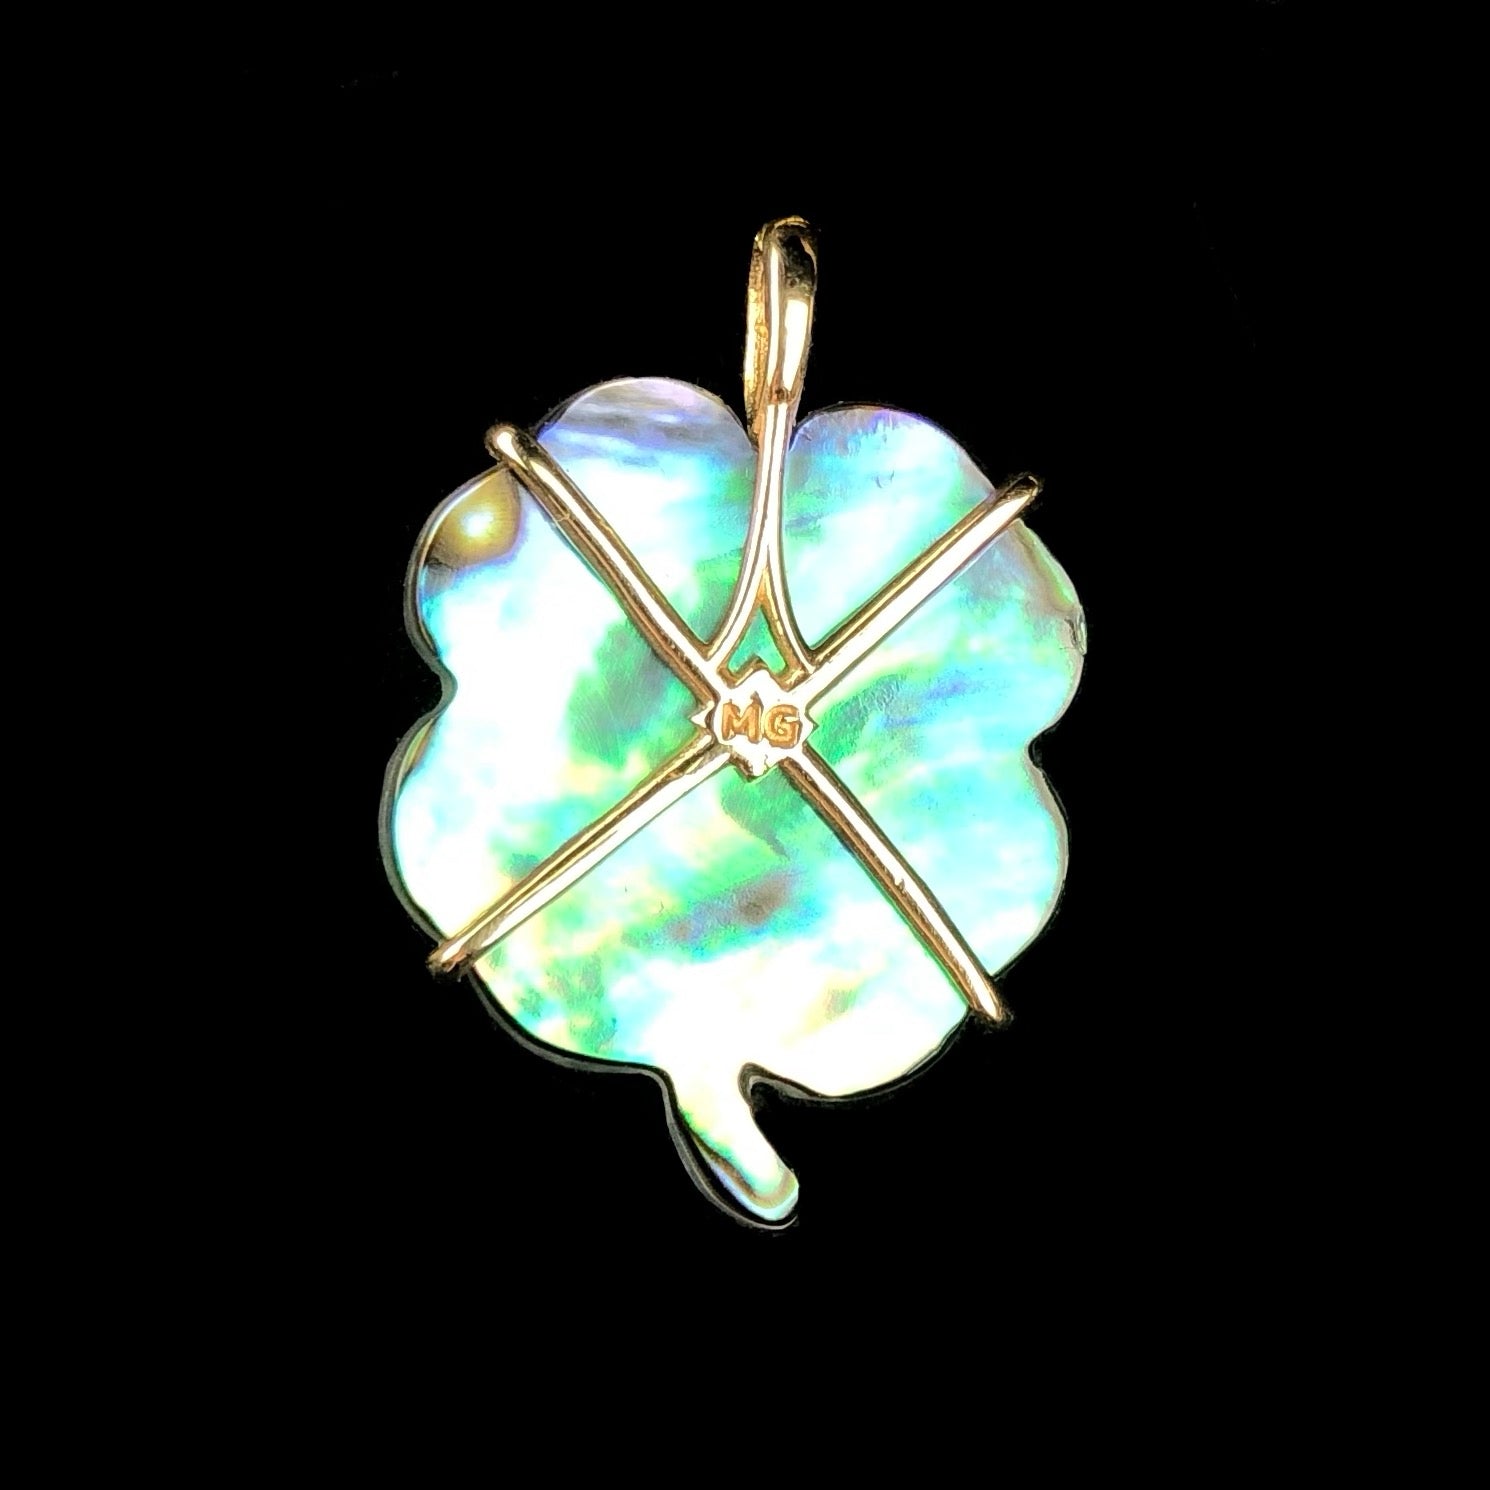 Back view of Luminescent Clover Charm set in 14K gold with artist's initials MG